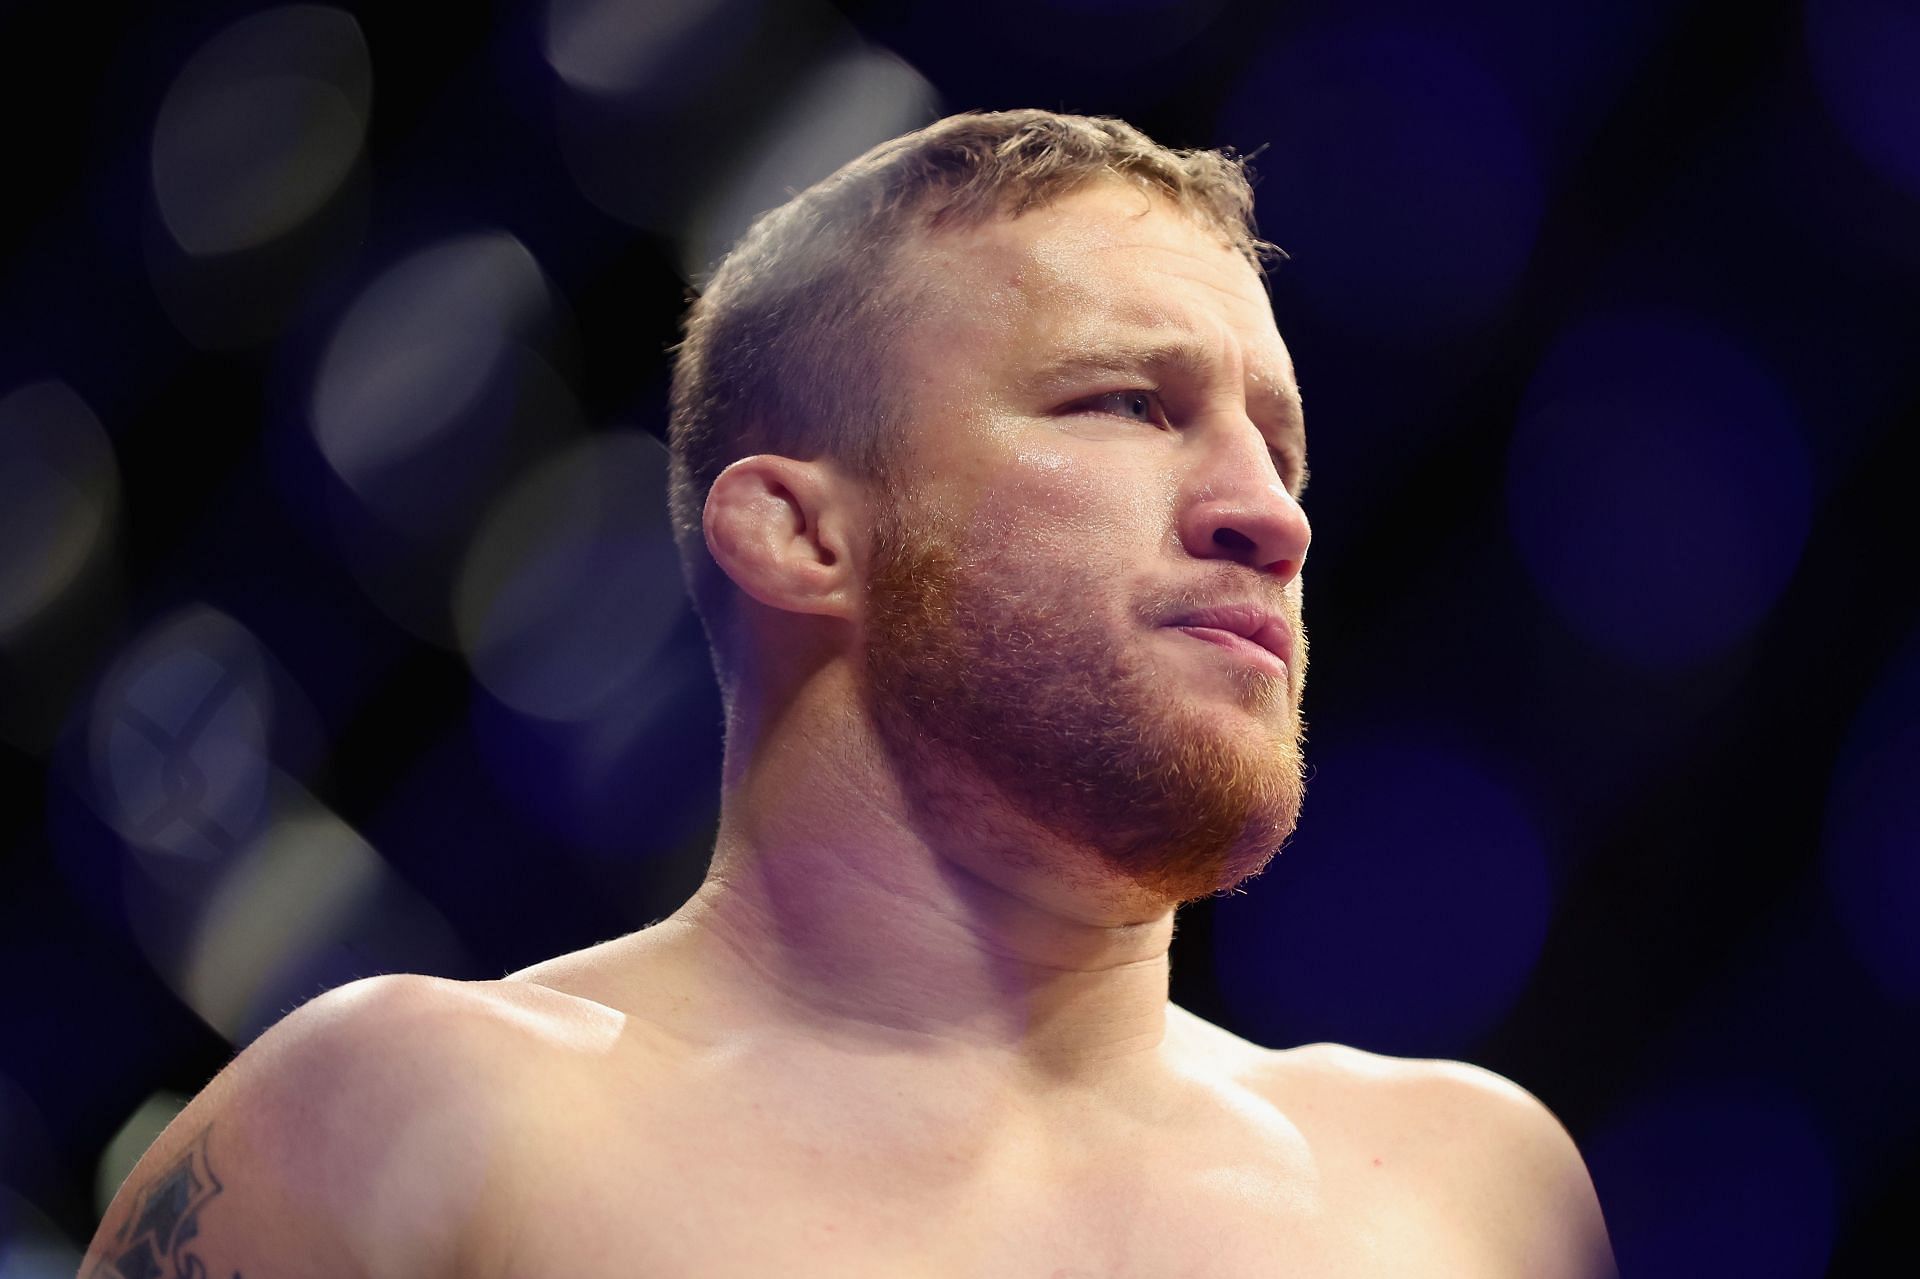 Gaethje has 1 win over fighters currently ranked in the top 10